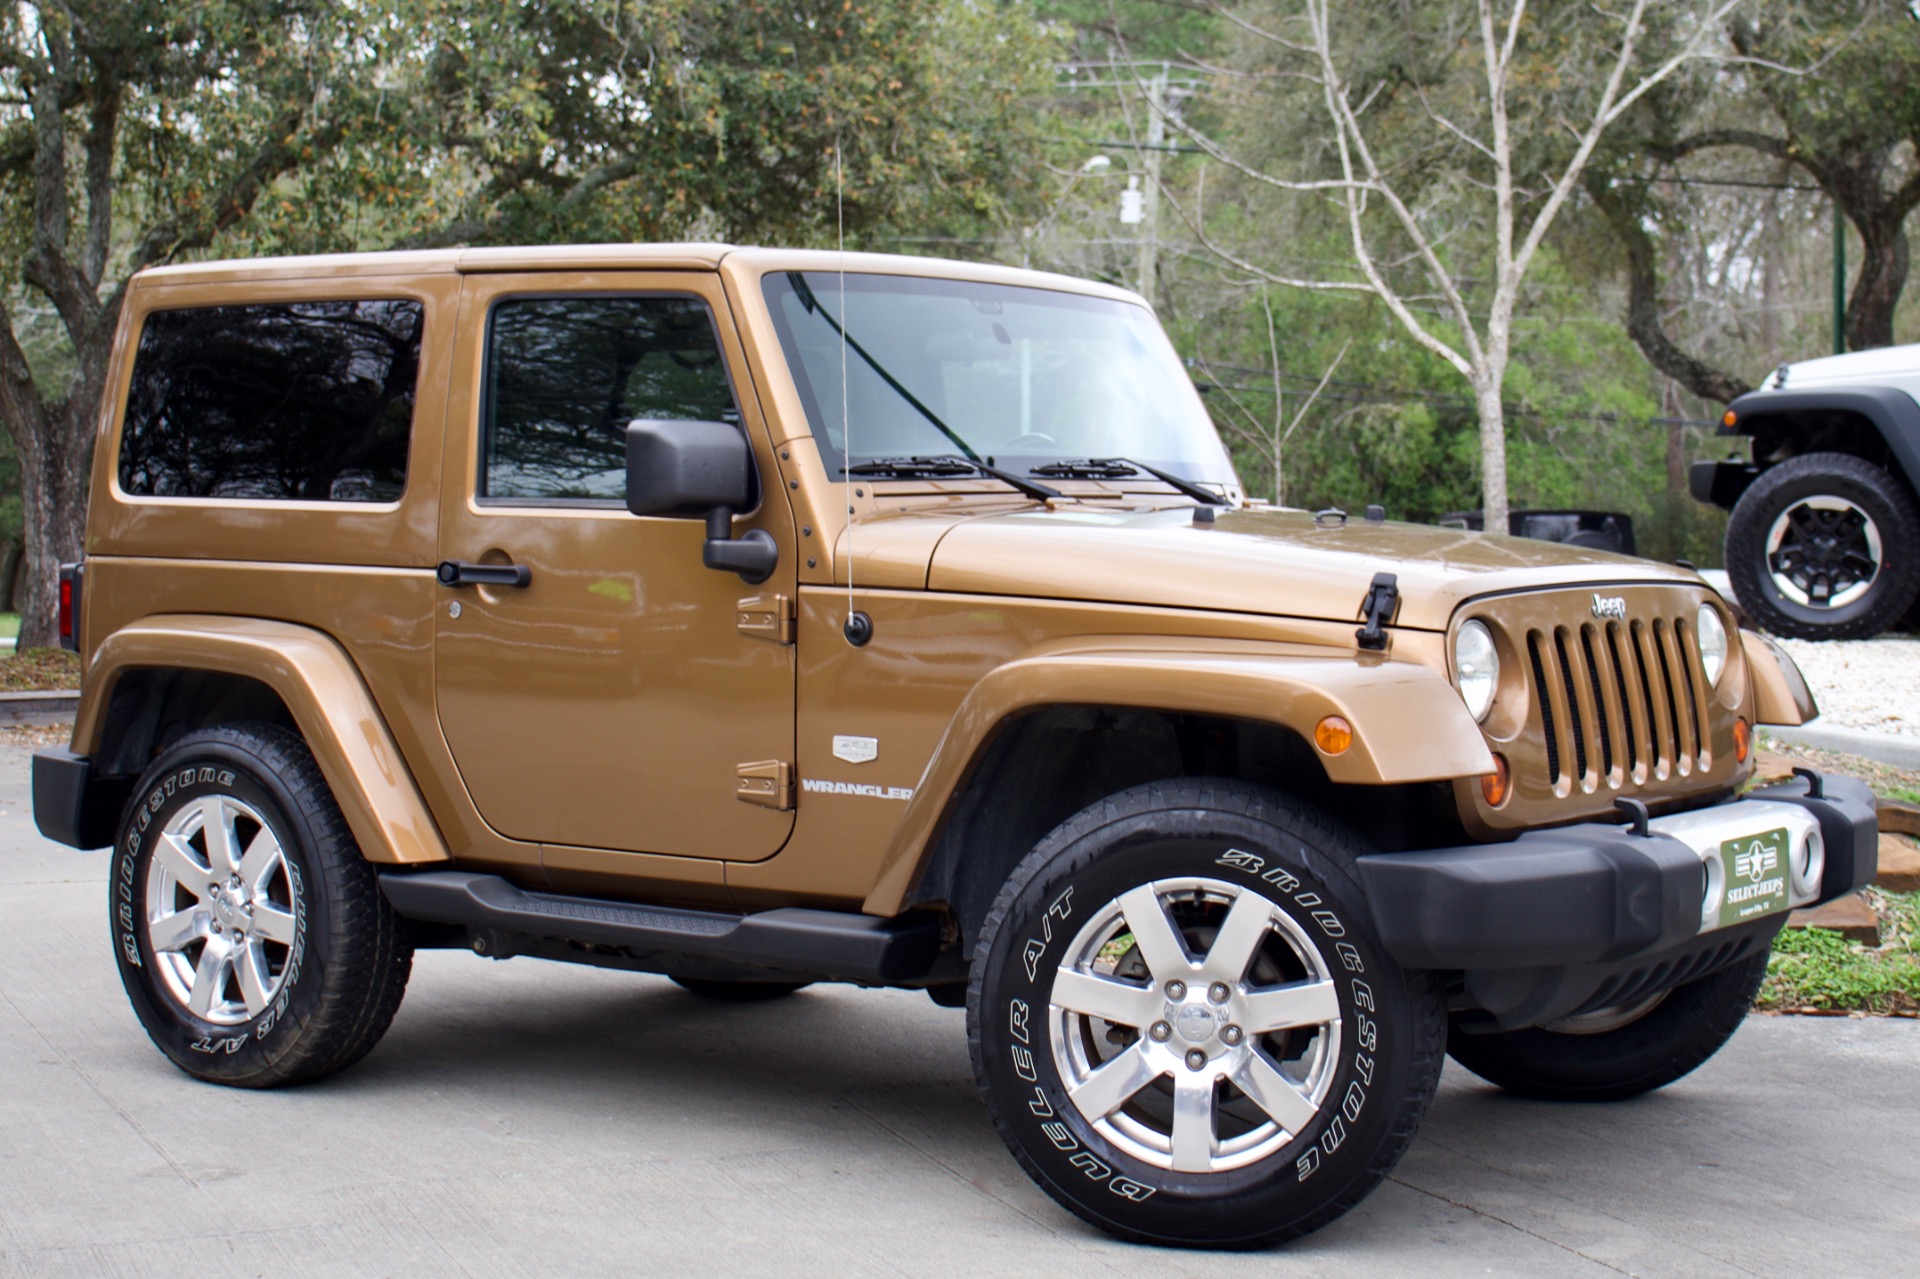 Used 2011 Jeep Wrangler 70th Anniversary For Sale ($19,995) | Select Jeeps  Inc. Stock #581771